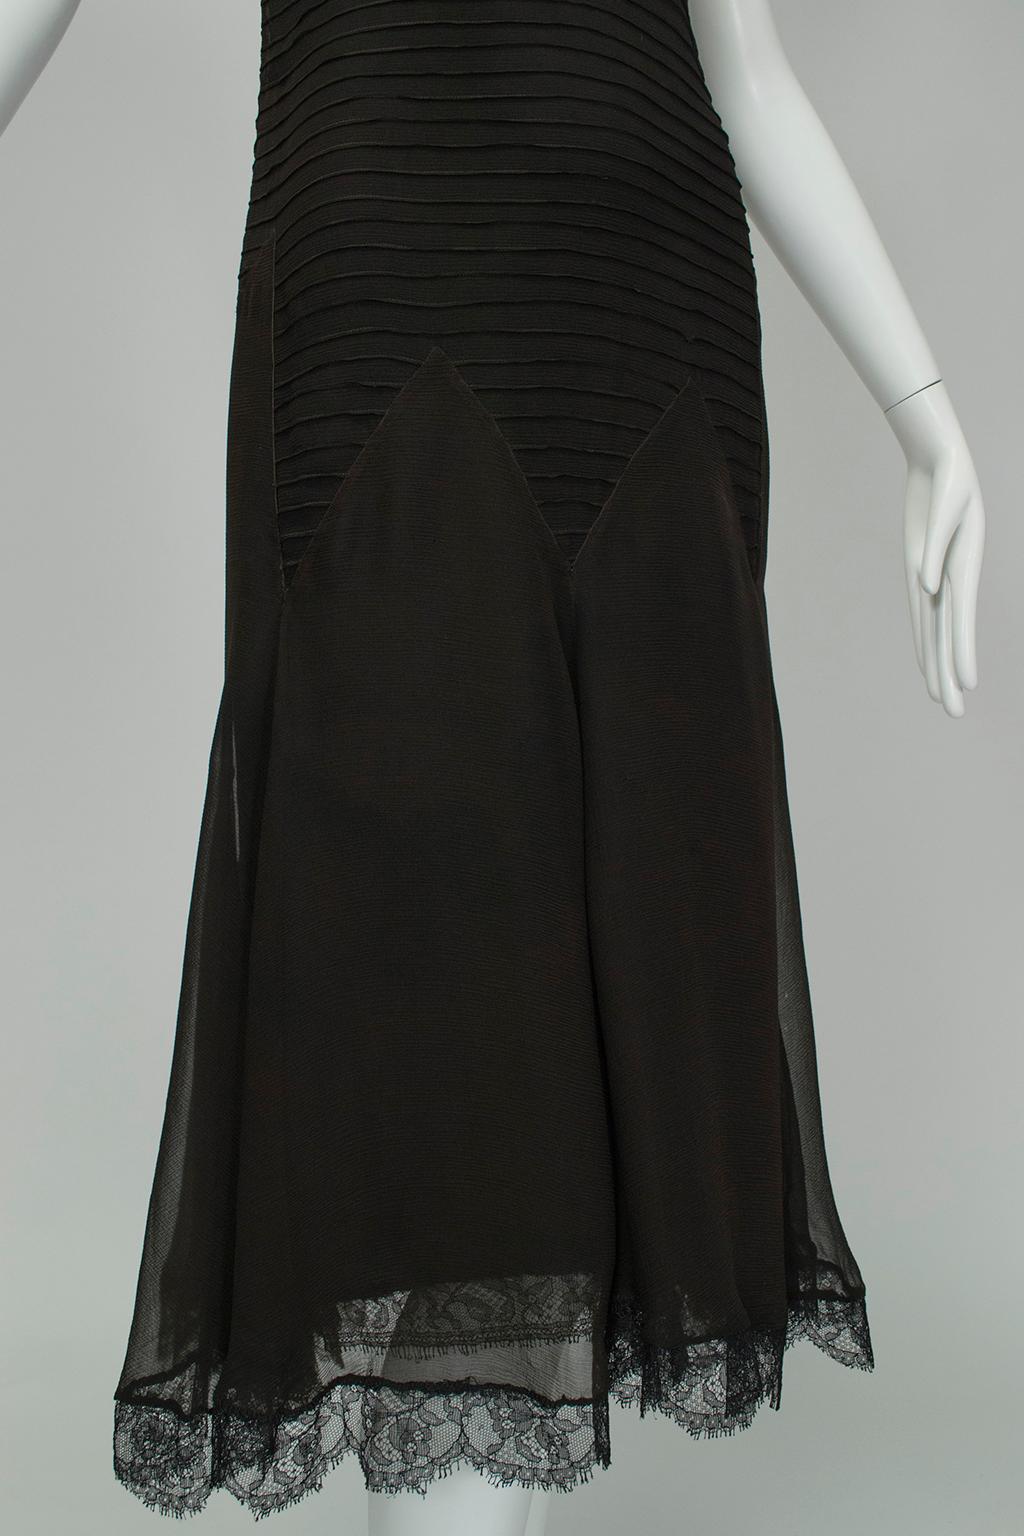 Embroidered Drop Waist Trumpet Dress with Pintuck Illusion Bodice, 1920s 4